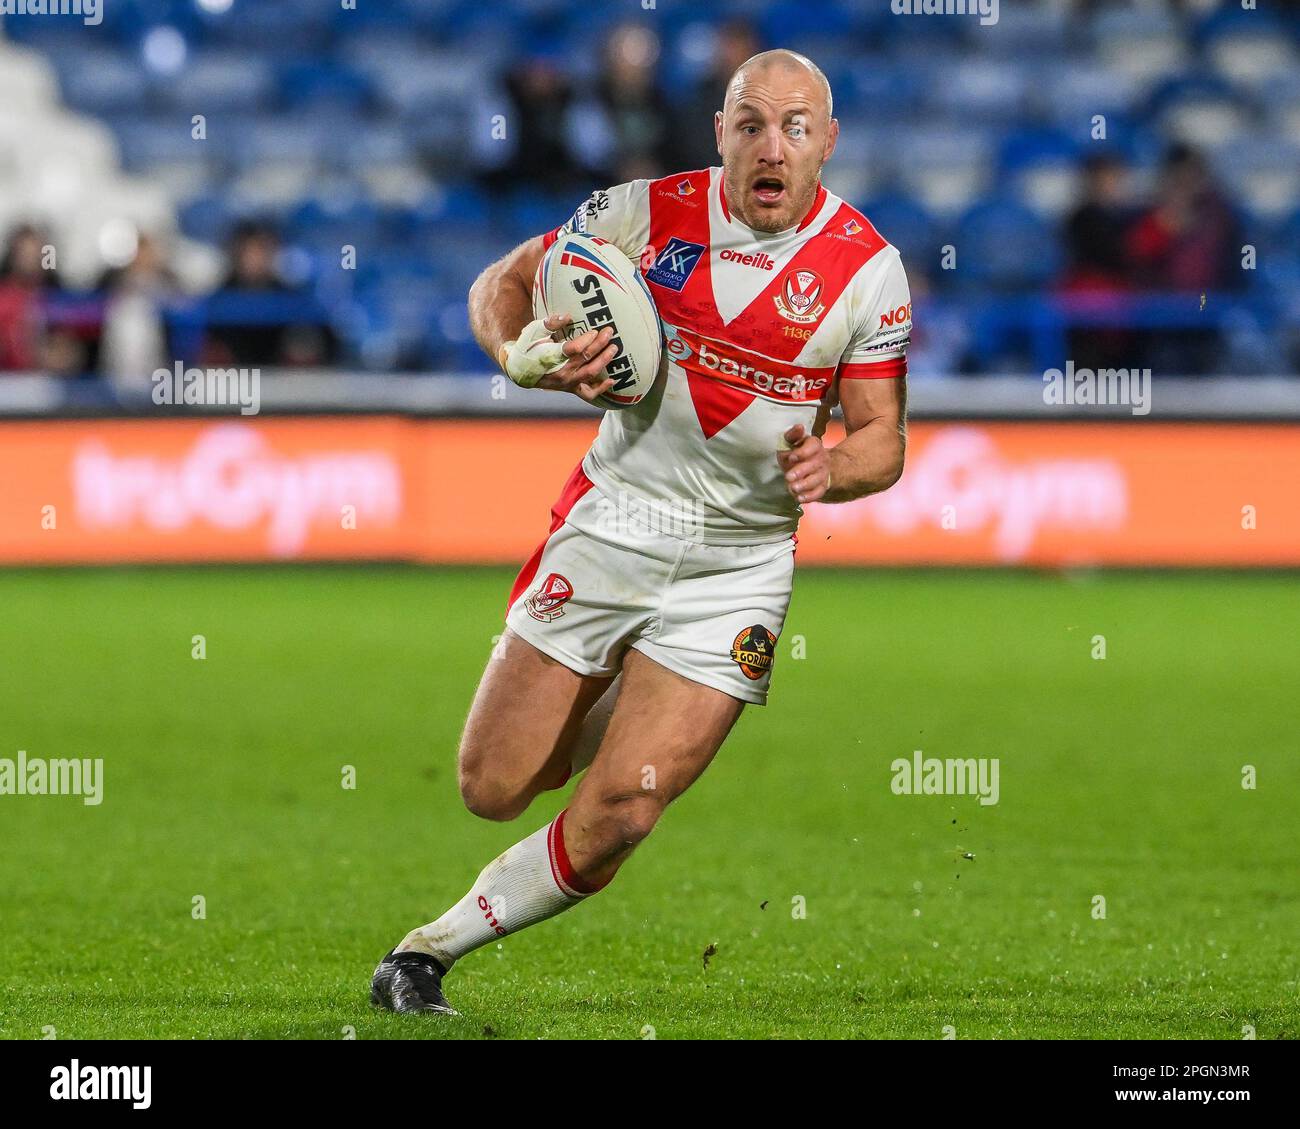 James Roby #9 of St Helens makes a break during the Betfred Super League Round 6 match Huddersfield Giants vs St Helens at John Smith's Stadium, Huddersfield, United Kingdom, 23rd March 2023  (Photo by Craig Thomas/News Images) Stock Photo